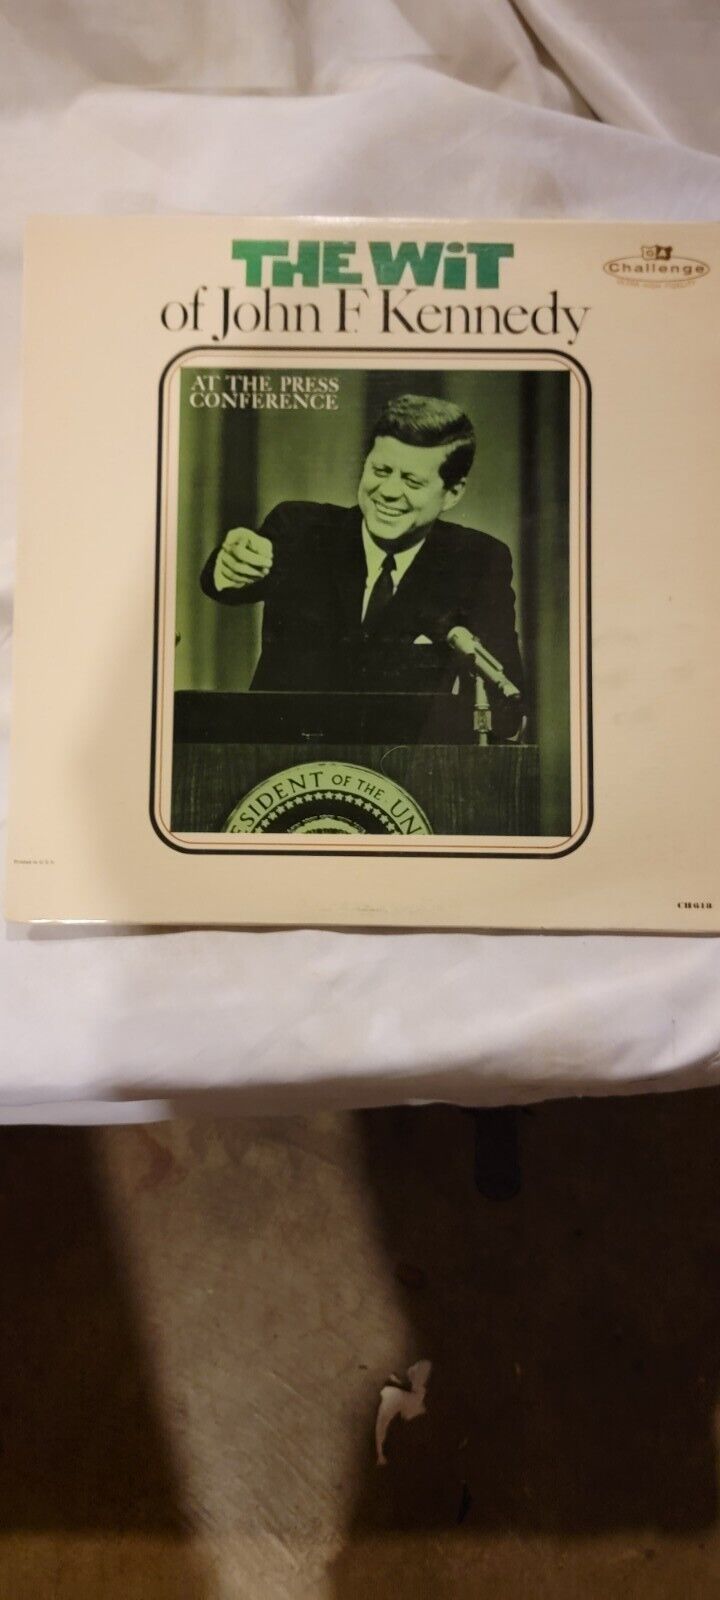 JOHN F. KENNEDY: the wit of john f. kennedy at the press conference CHALLENGE LP